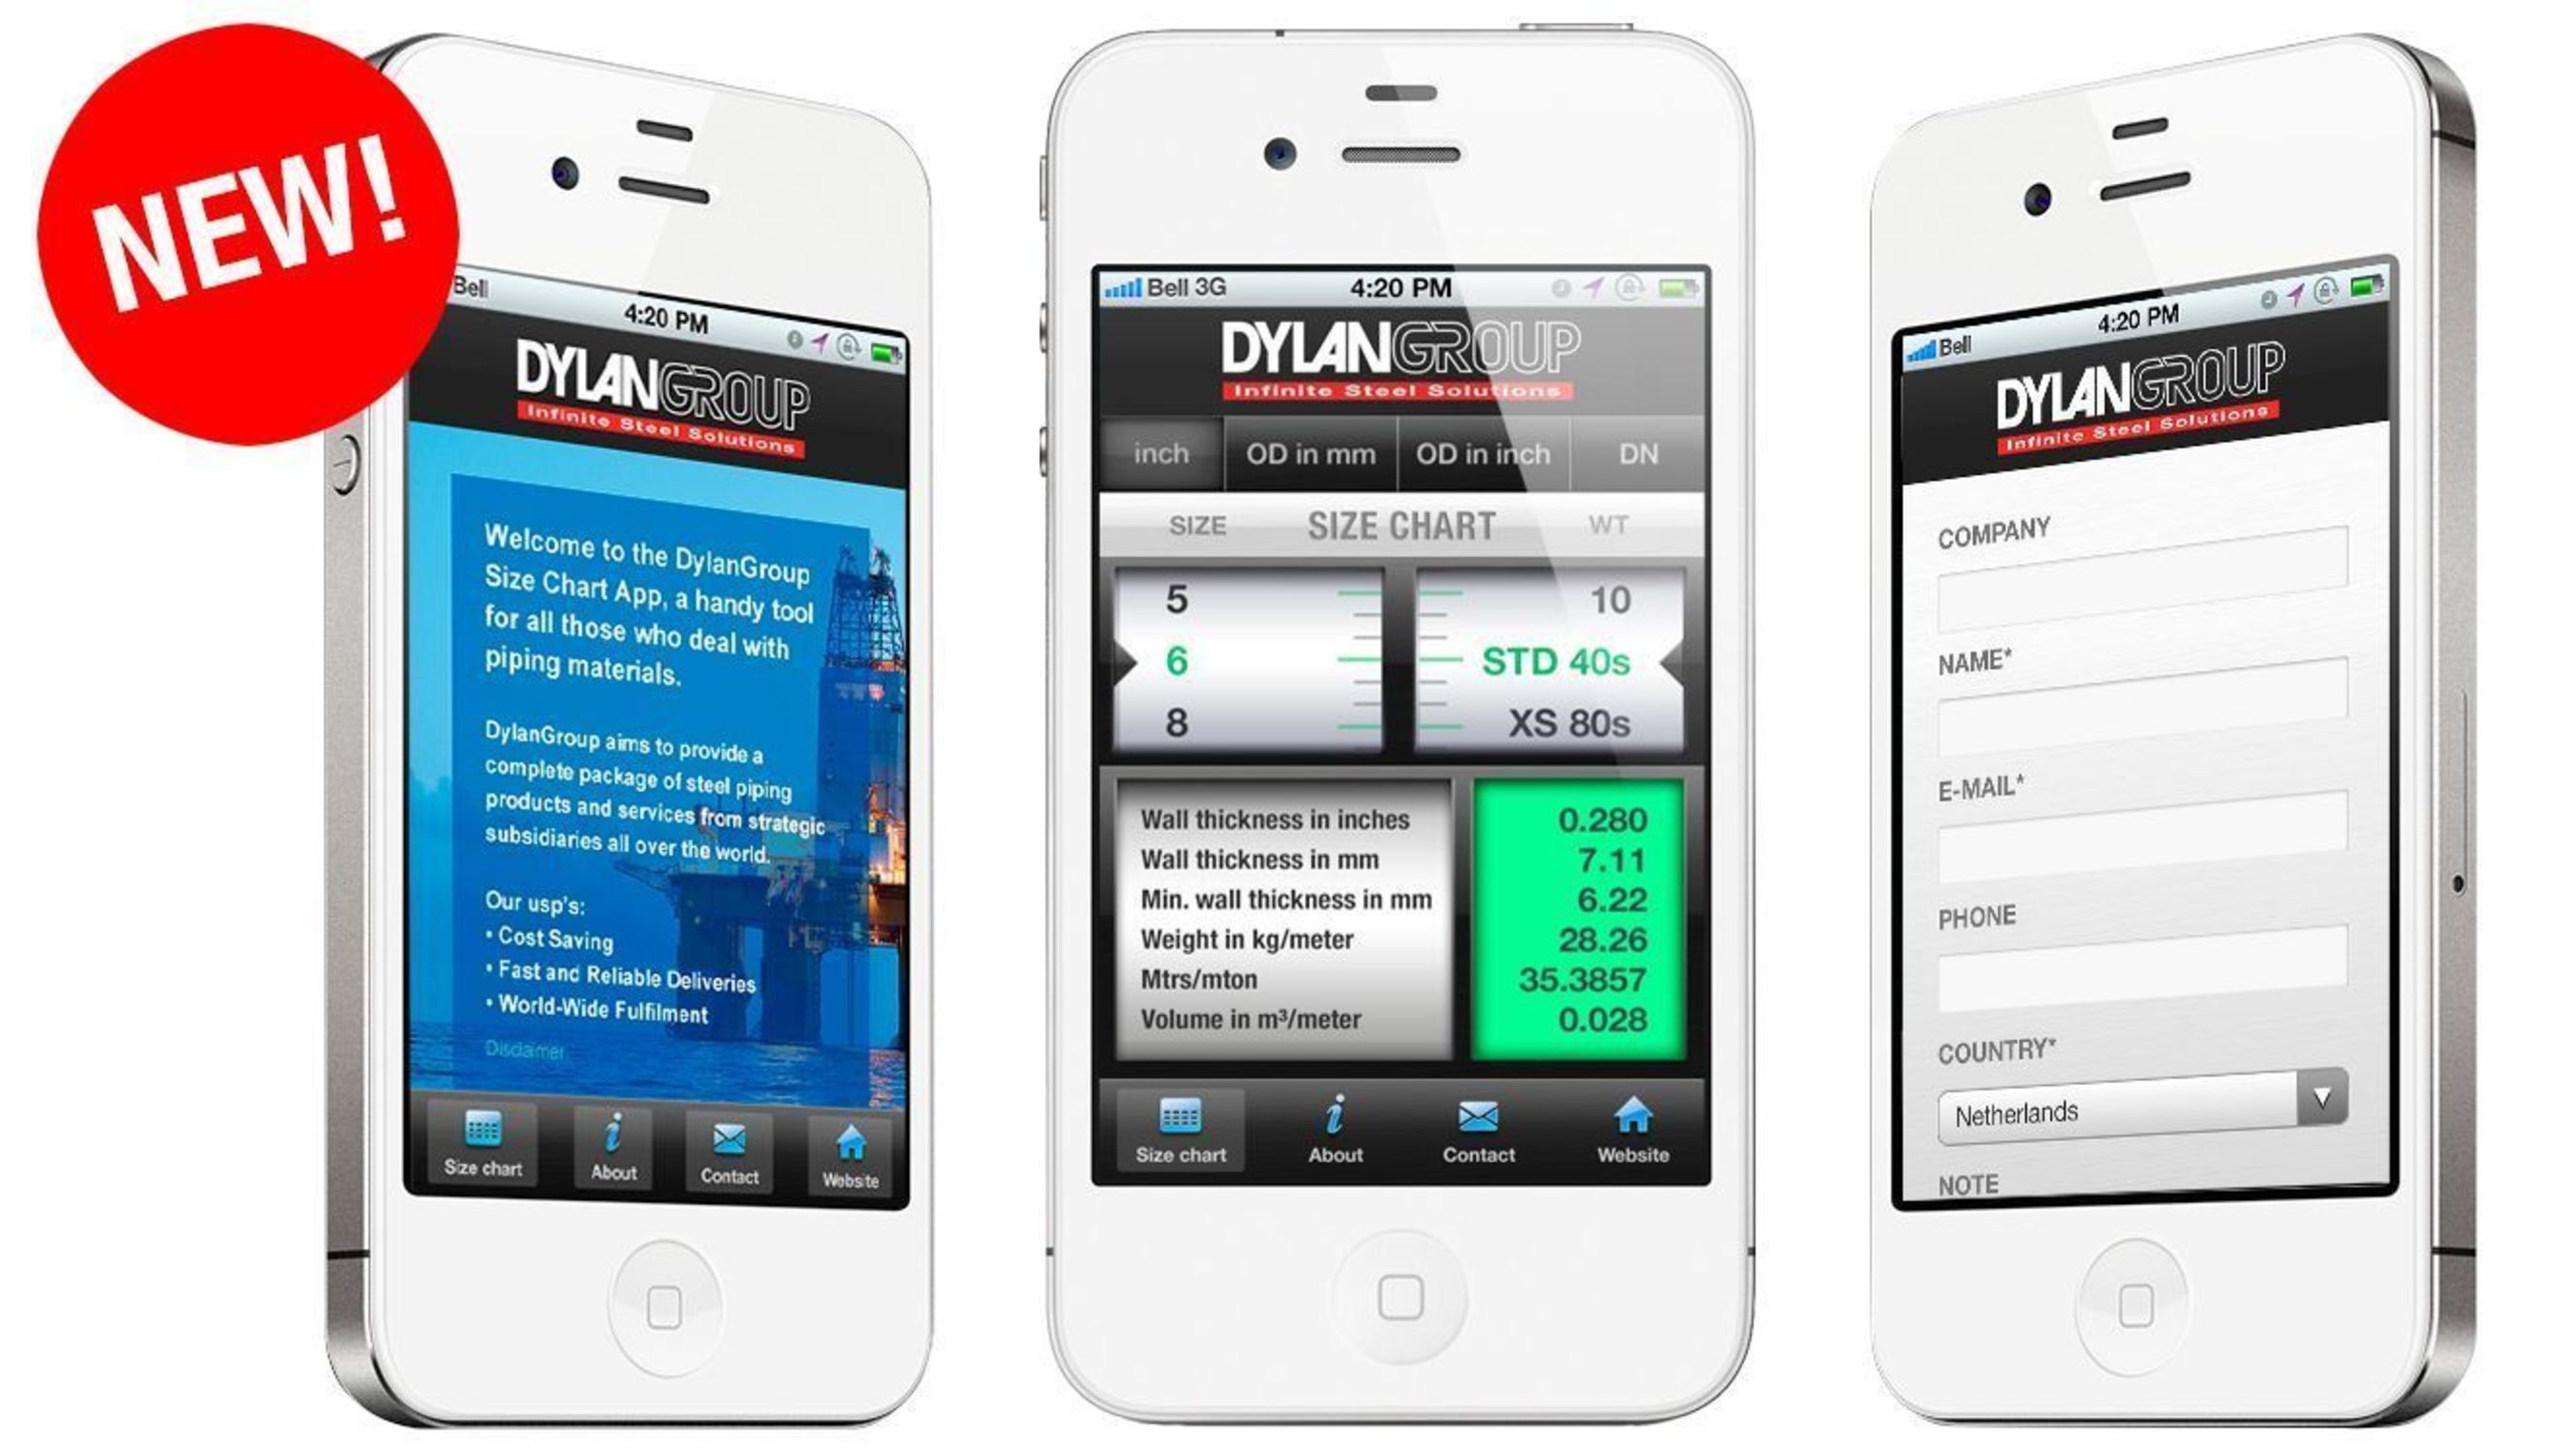 DylanGroup is proud to introduce the DylanGroup Size Chart App, a handy tool for all those who deal with piping materials (PRNewsFoto/DylanGroup)